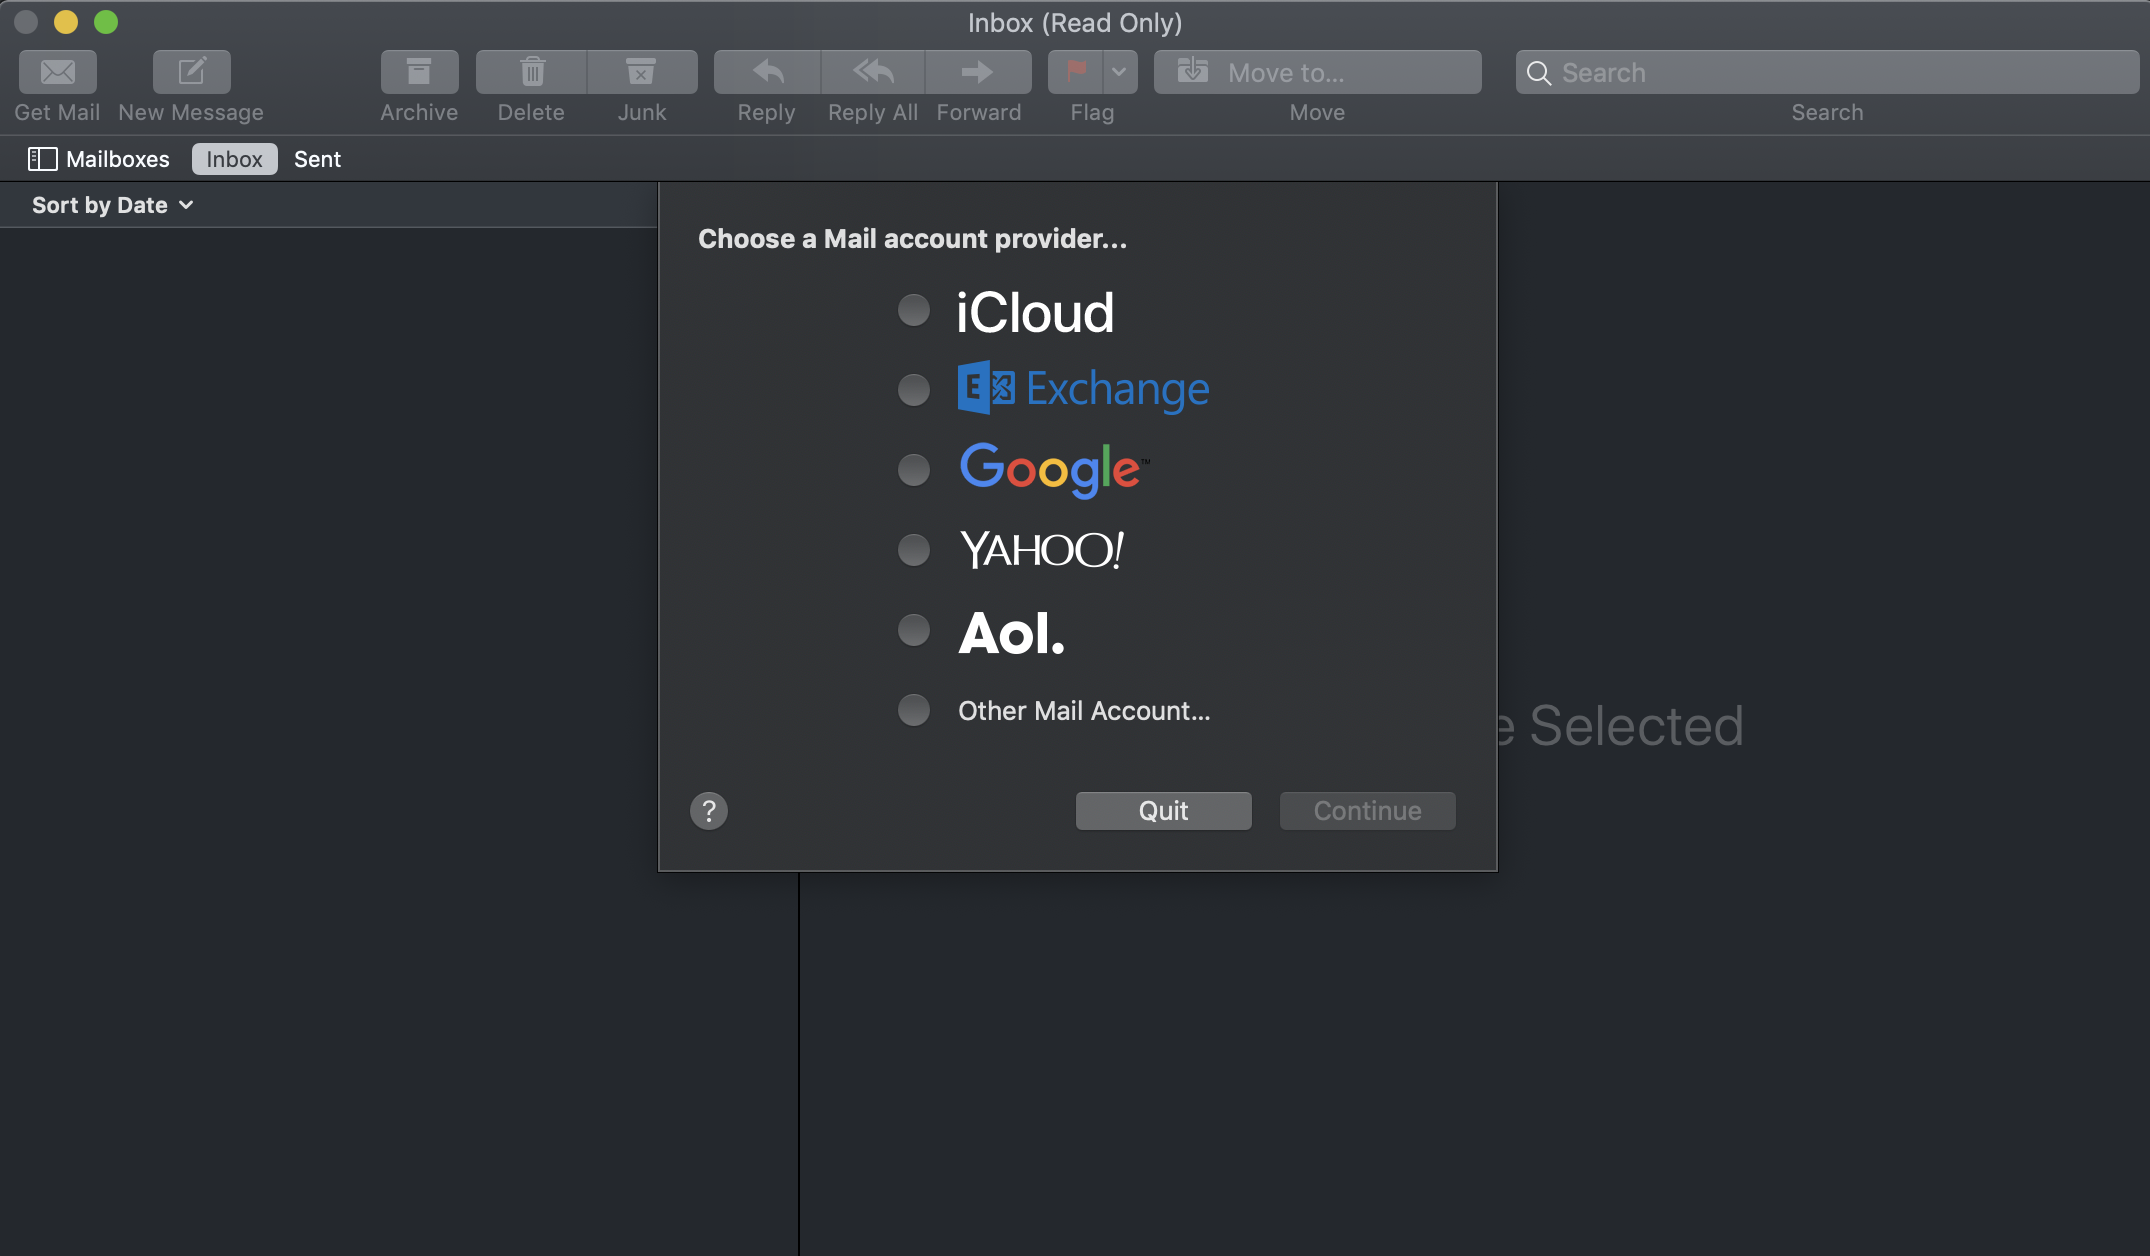 Screenshot of the share options offered by Mac's email application, including iCloud, Exchange, Google, Yahoo and AOL.